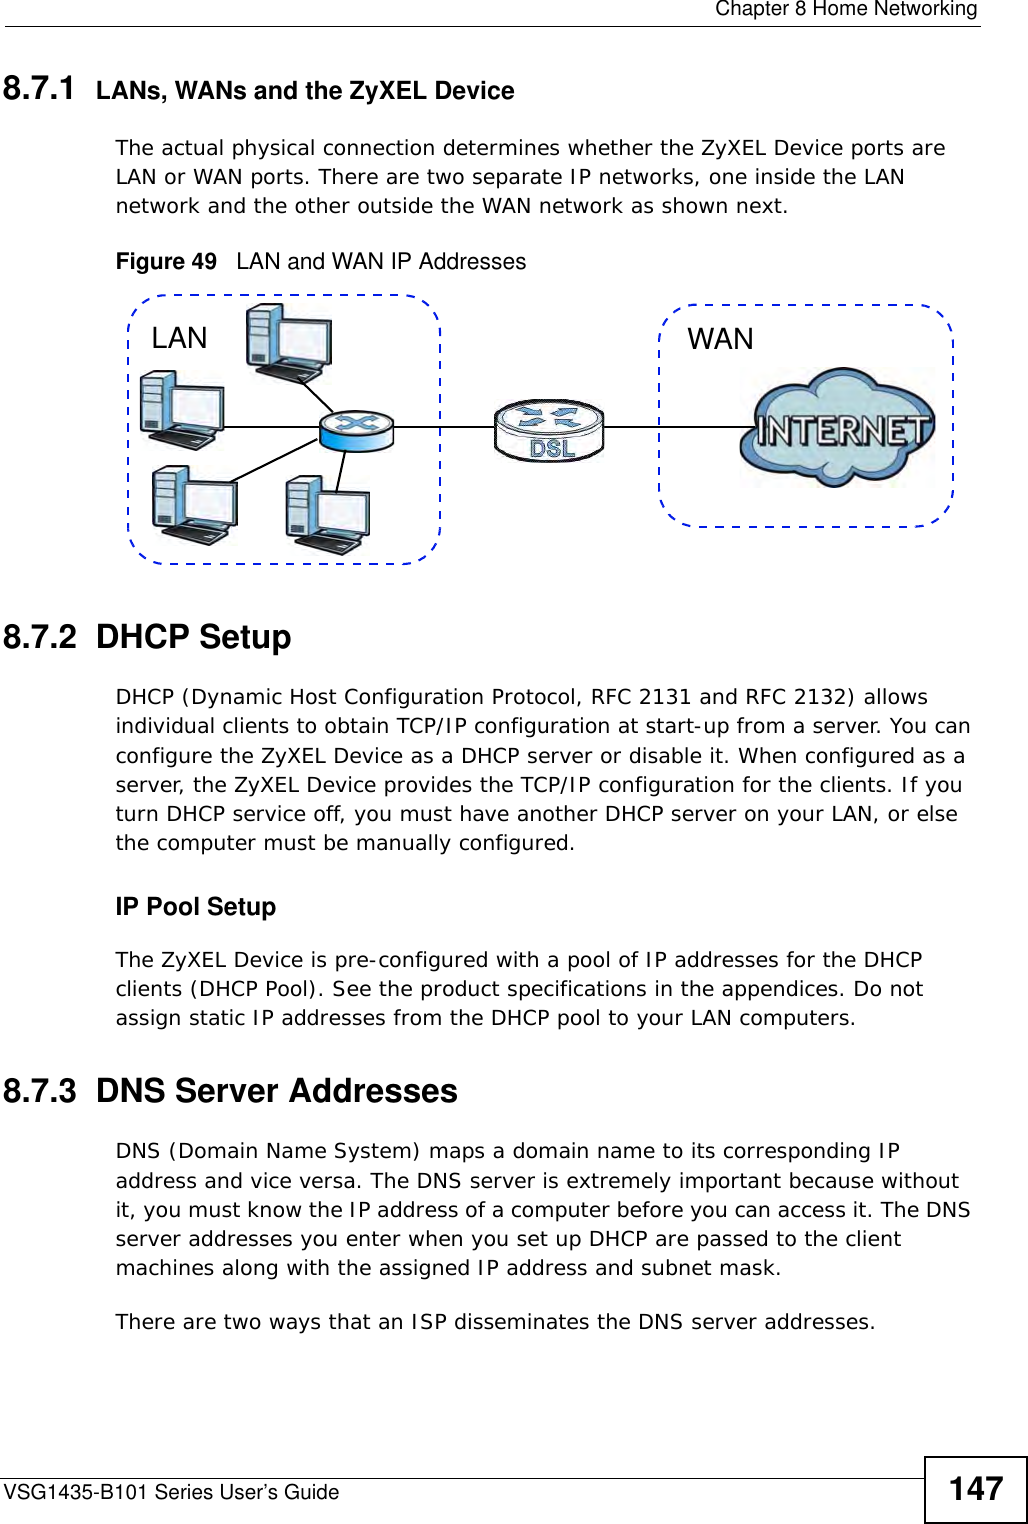  Chapter 8 Home NetworkingVSG1435-B101 Series User’s Guide 1478.7.1  LANs, WANs and the ZyXEL DeviceThe actual physical connection determines whether the ZyXEL Device ports are LAN or WAN ports. There are two separate IP networks, one inside the LAN network and the other outside the WAN network as shown next.Figure 49   LAN and WAN IP Addresses8.7.2  DHCP SetupDHCP (Dynamic Host Configuration Protocol, RFC 2131 and RFC 2132) allows individual clients to obtain TCP/IP configuration at start-up from a server. You can configure the ZyXEL Device as a DHCP server or disable it. When configured as a server, the ZyXEL Device provides the TCP/IP configuration for the clients. If you turn DHCP service off, you must have another DHCP server on your LAN, or else the computer must be manually configured. IP Pool SetupThe ZyXEL Device is pre-configured with a pool of IP addresses for the DHCP clients (DHCP Pool). See the product specifications in the appendices. Do not assign static IP addresses from the DHCP pool to your LAN computers.8.7.3  DNS Server Addresses DNS (Domain Name System) maps a domain name to its corresponding IP address and vice versa. The DNS server is extremely important because without it, you must know the IP address of a computer before you can access it. The DNS server addresses you enter when you set up DHCP are passed to the client machines along with the assigned IP address and subnet mask.There are two ways that an ISP disseminates the DNS server addresses. WANLAN